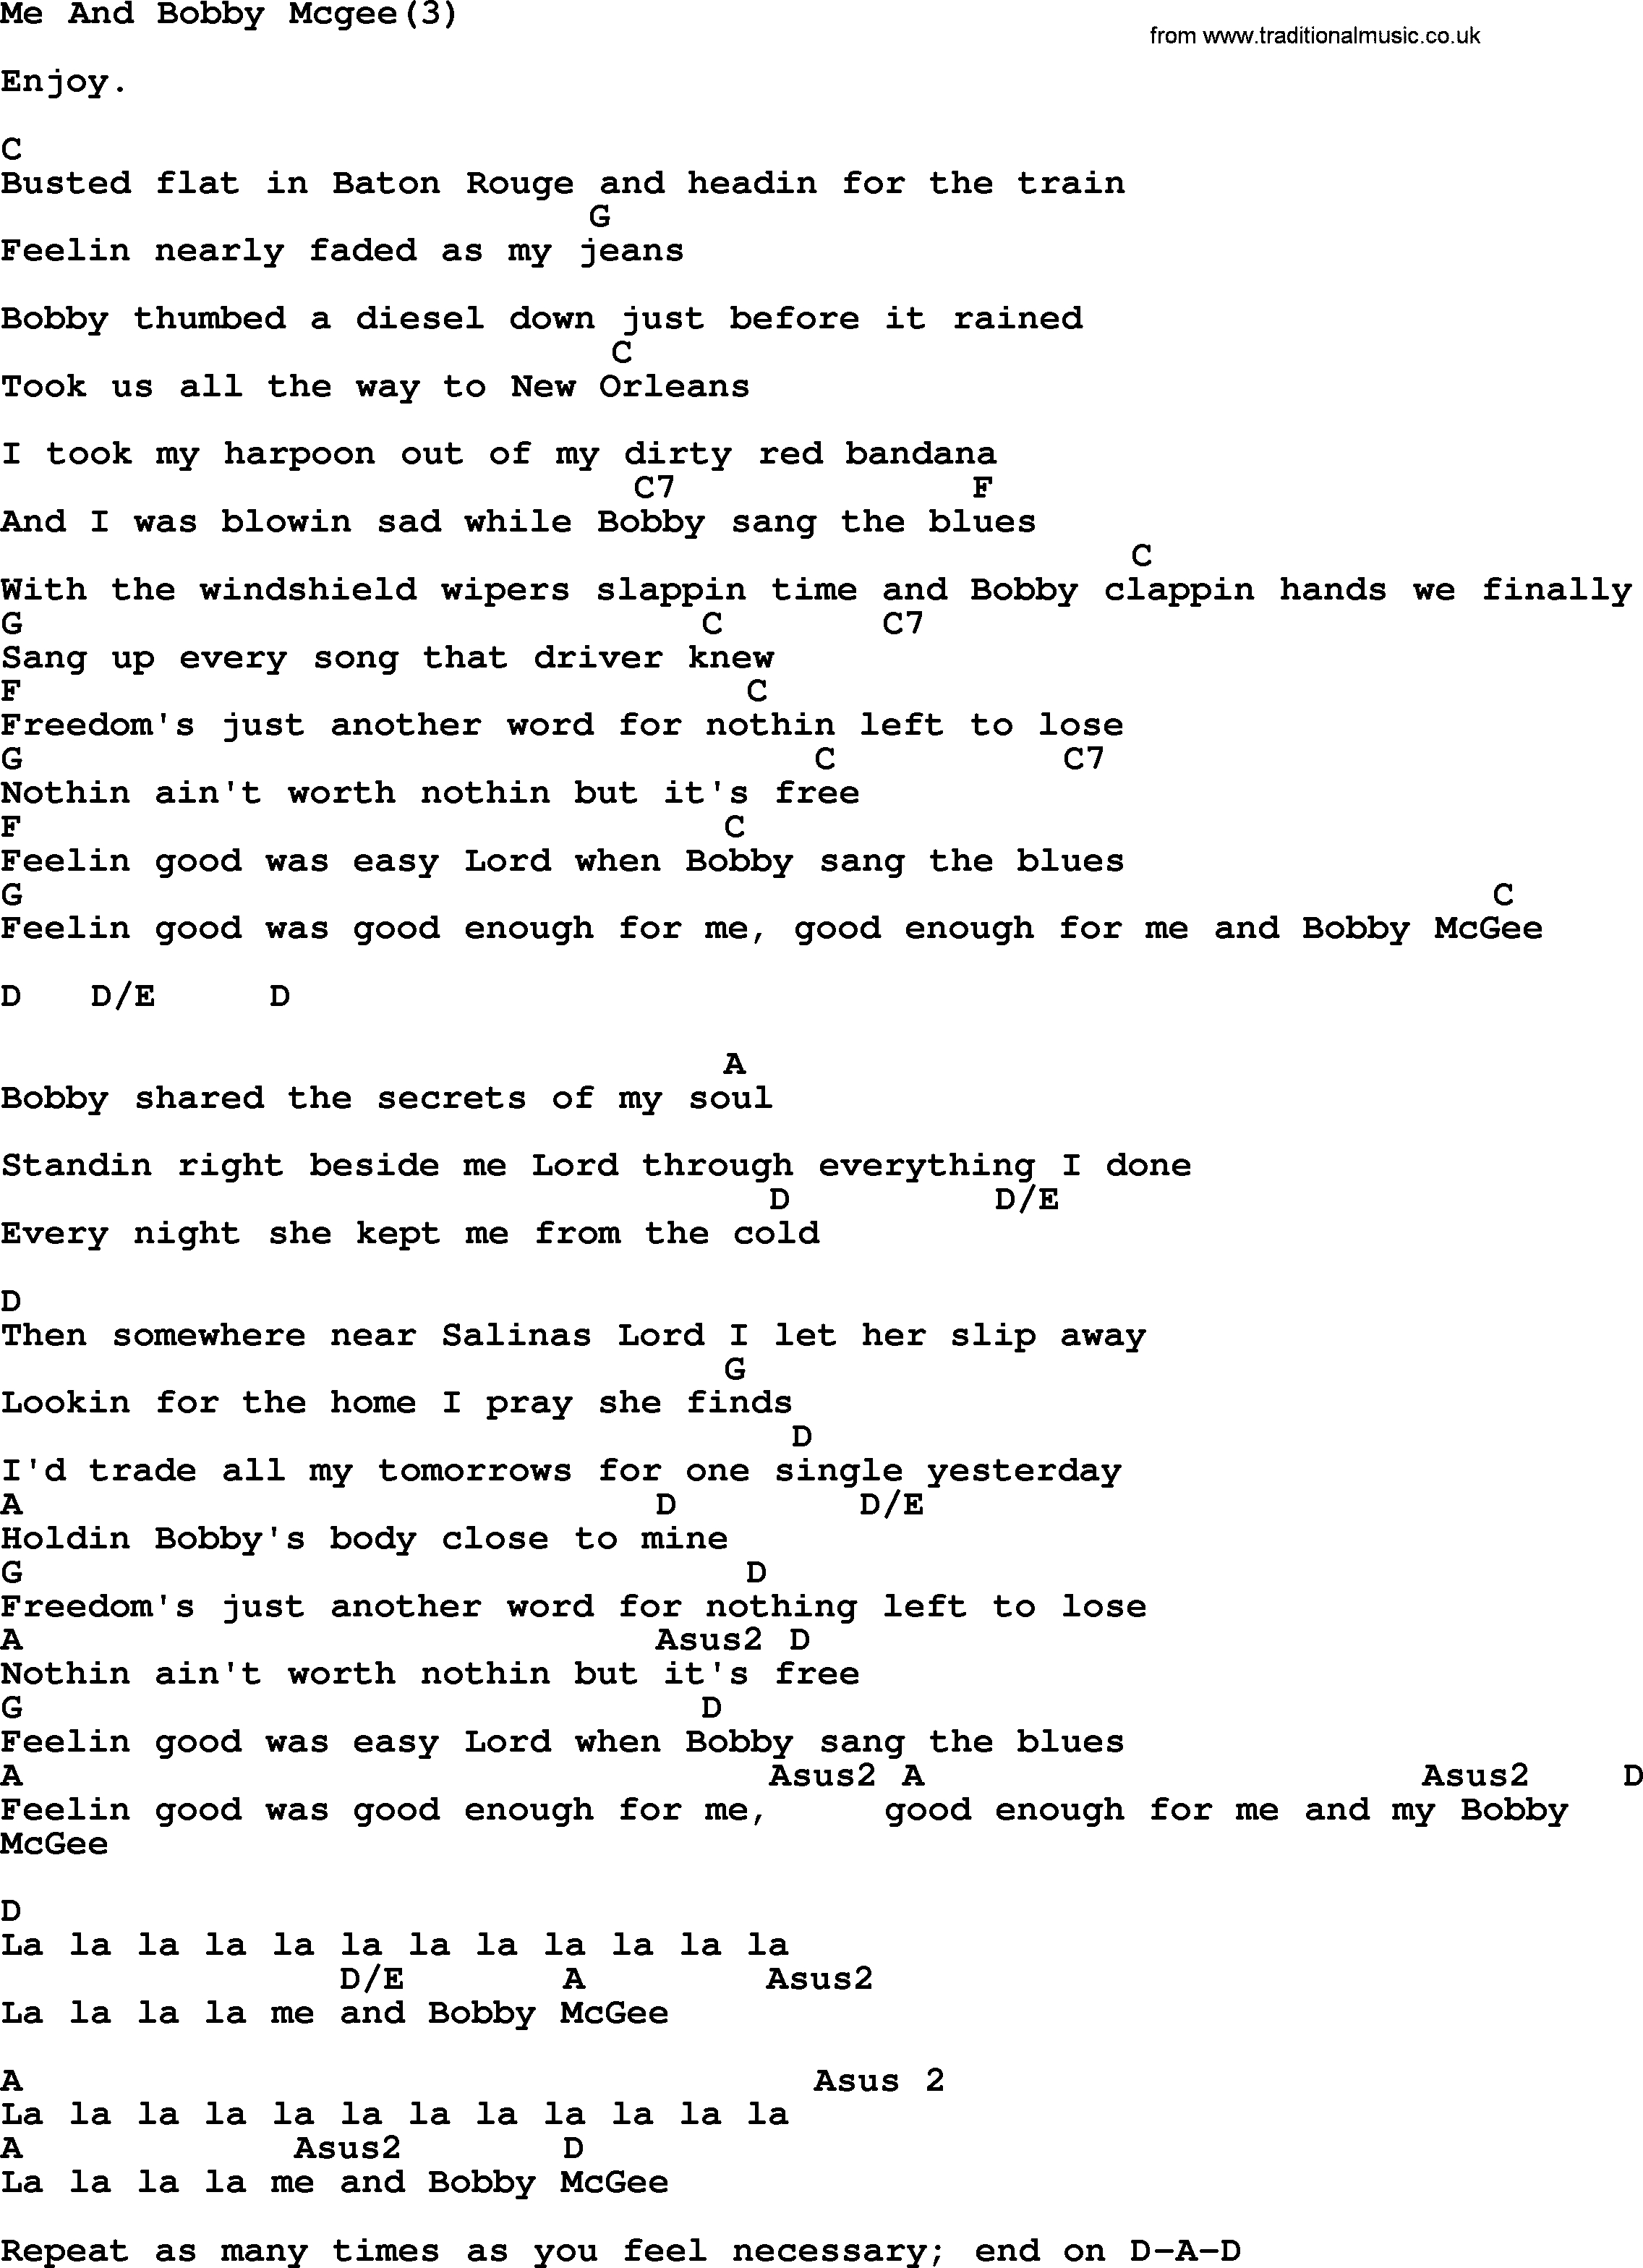 Me And Bobby Mcgee Chords Kris Kristofferson Song Me And Bob Mcgee3 Lyrics And Chords